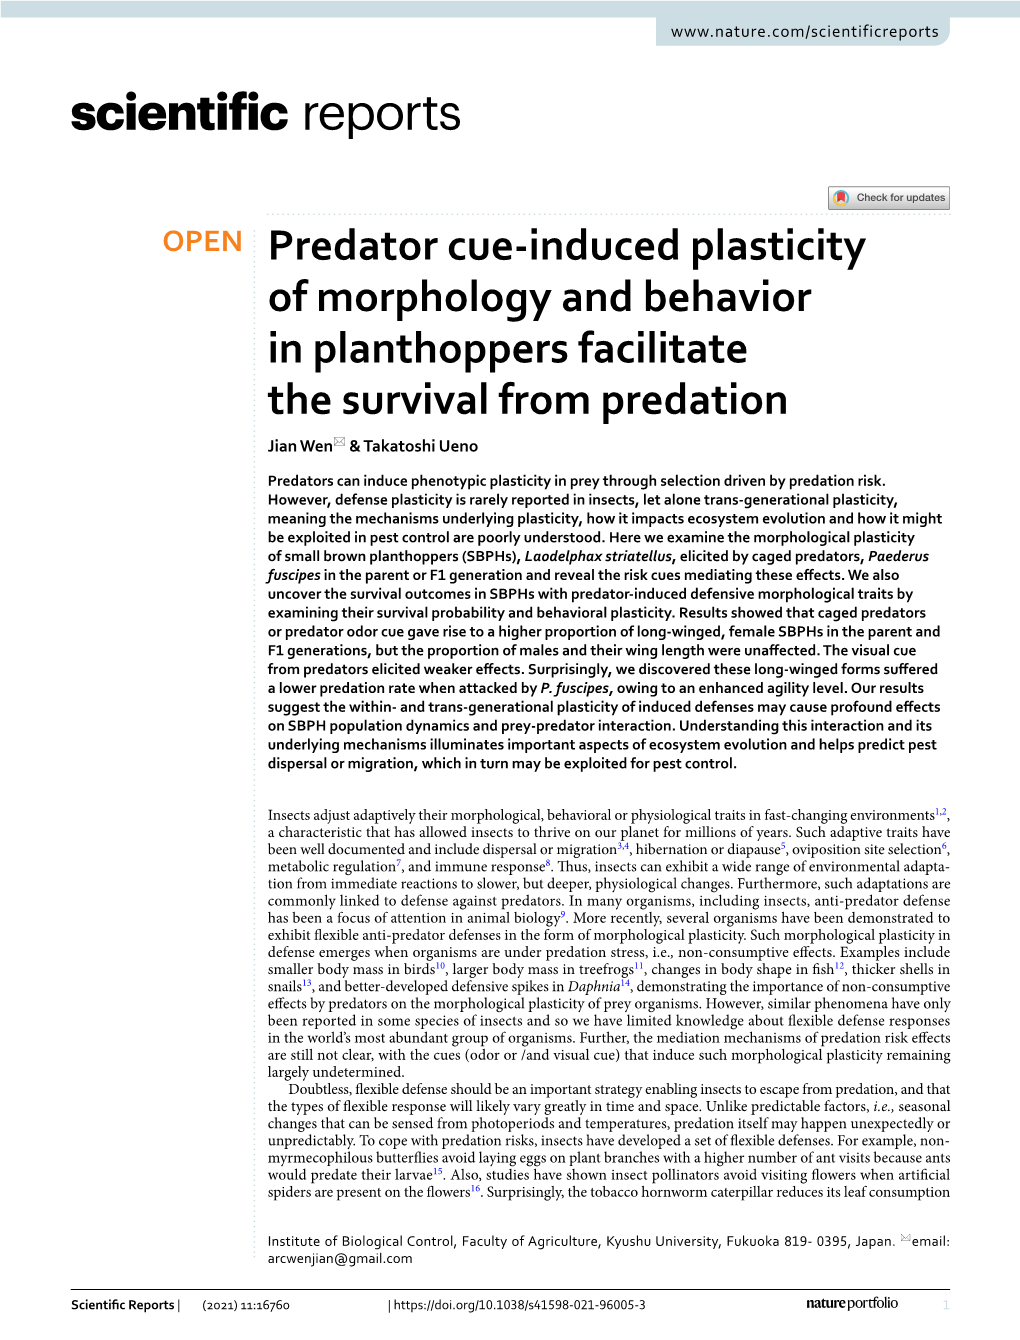 Predator Cue-Induced Plasticity of Morphology and Behavior in Planthoppers Facilitate the Survival from Predation